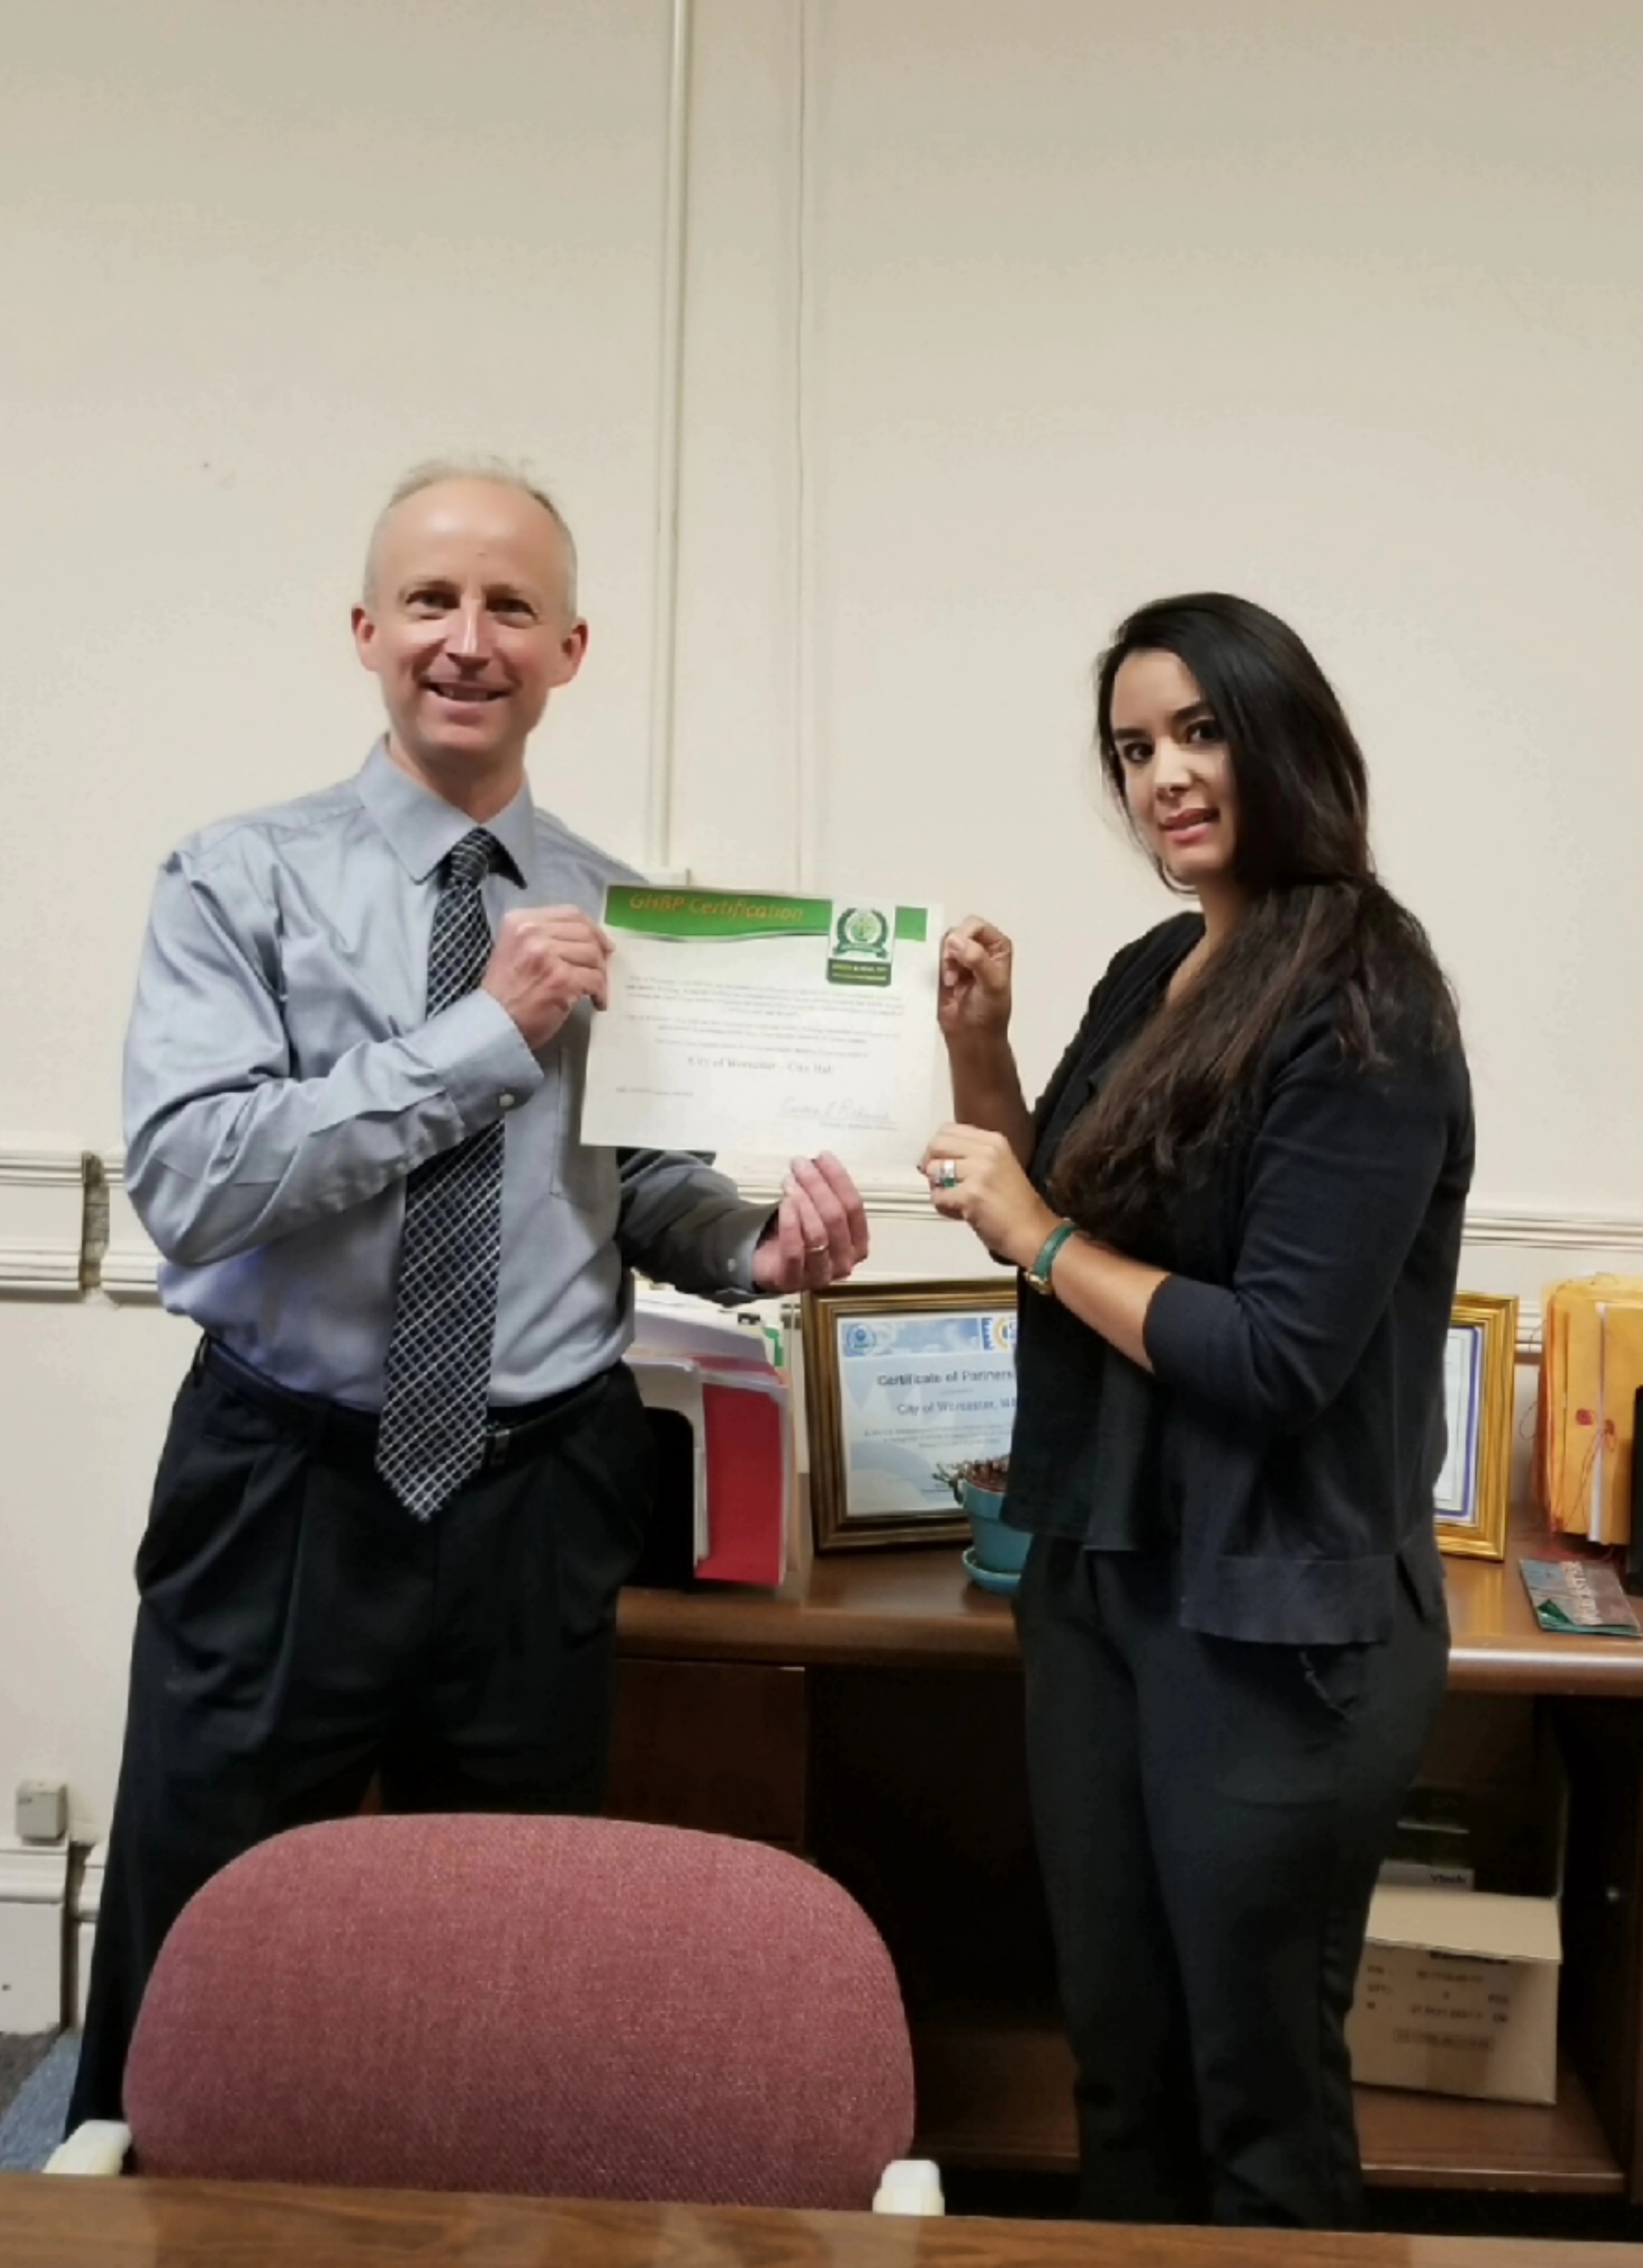 John Odell, Director of Worcester Energy and Asset Management Division, and Diana Gallego, owner and General Manager of BestPro Cleaning, holding up a Worcester City Hall’s Green and Healthy Building Certificate